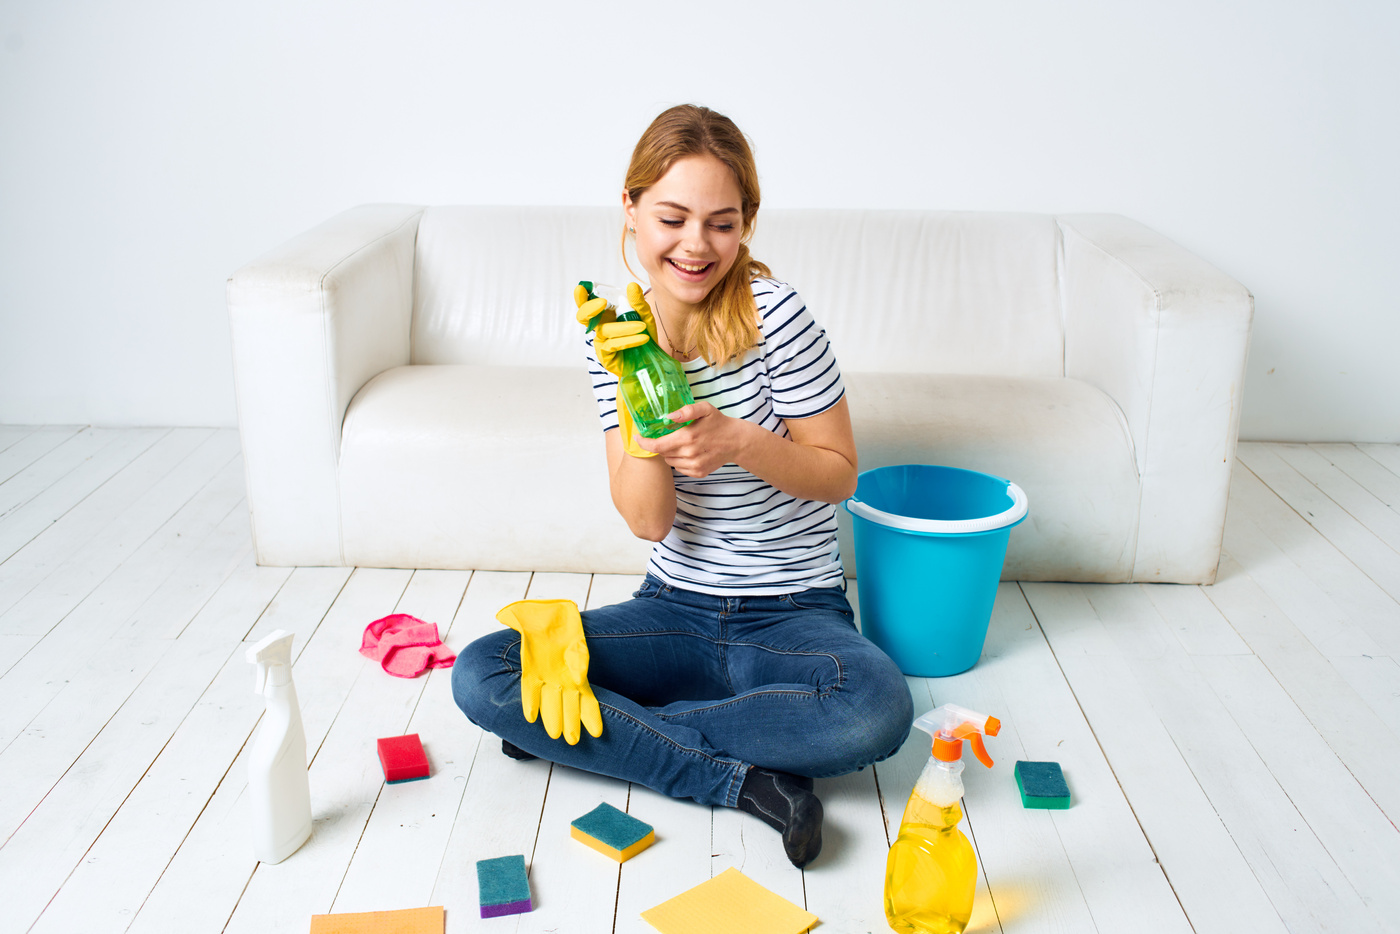 Woman Sitting on the Floor with Cleaning Supplies Cleaning Service Housework